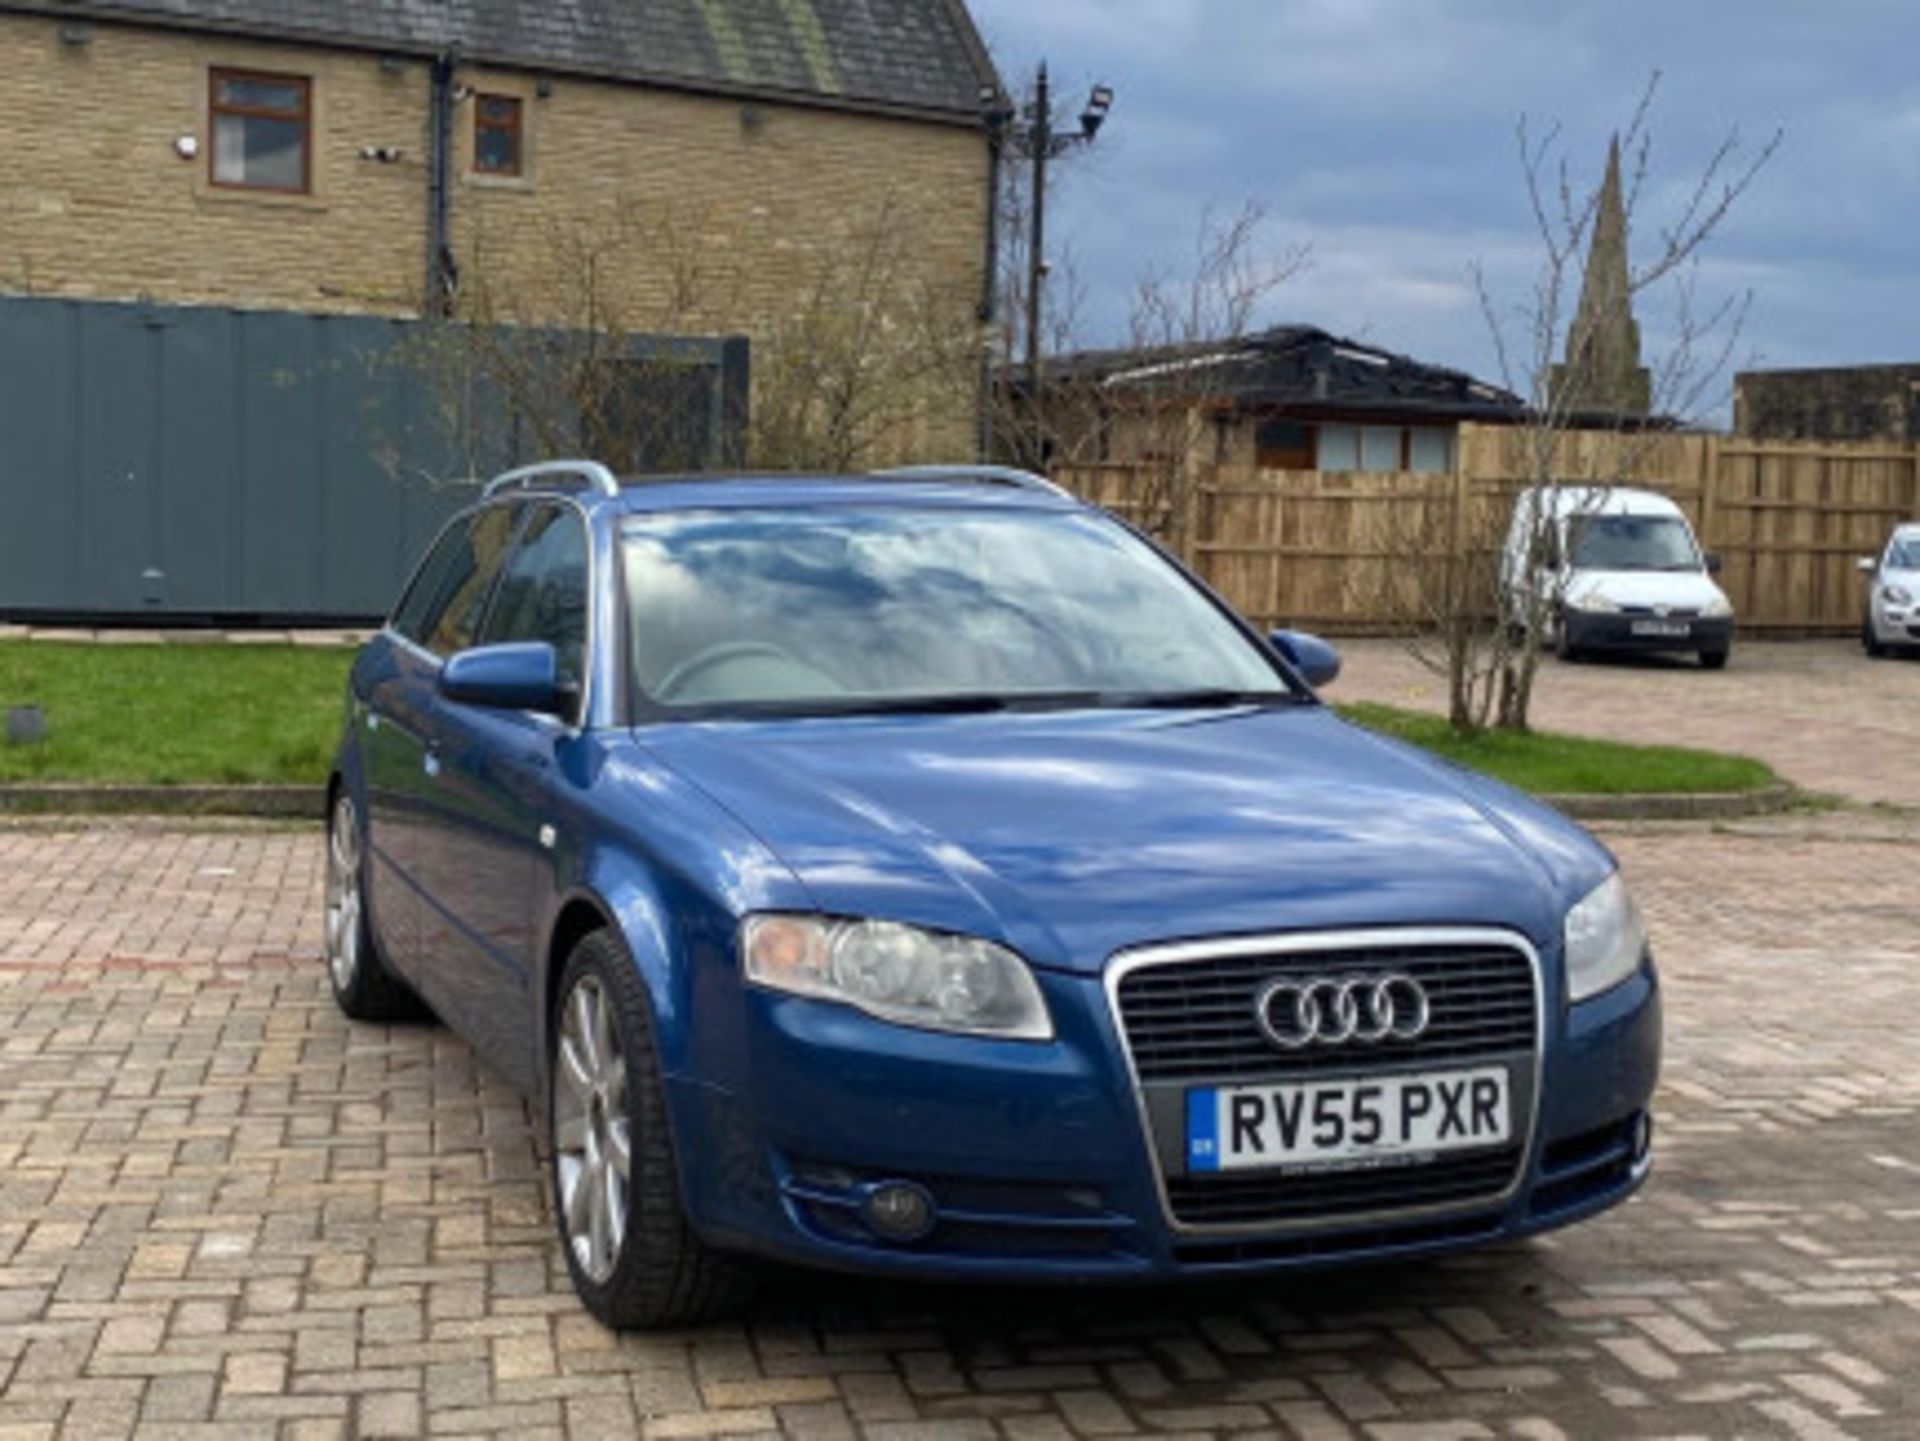 AUDI A4 AVANT 1.9 TDI SE 5DR ESTATE - RARE AND RELIABLE LUXURY WAGON >>--NO VAT ON HAMMER--<< - Image 26 of 63